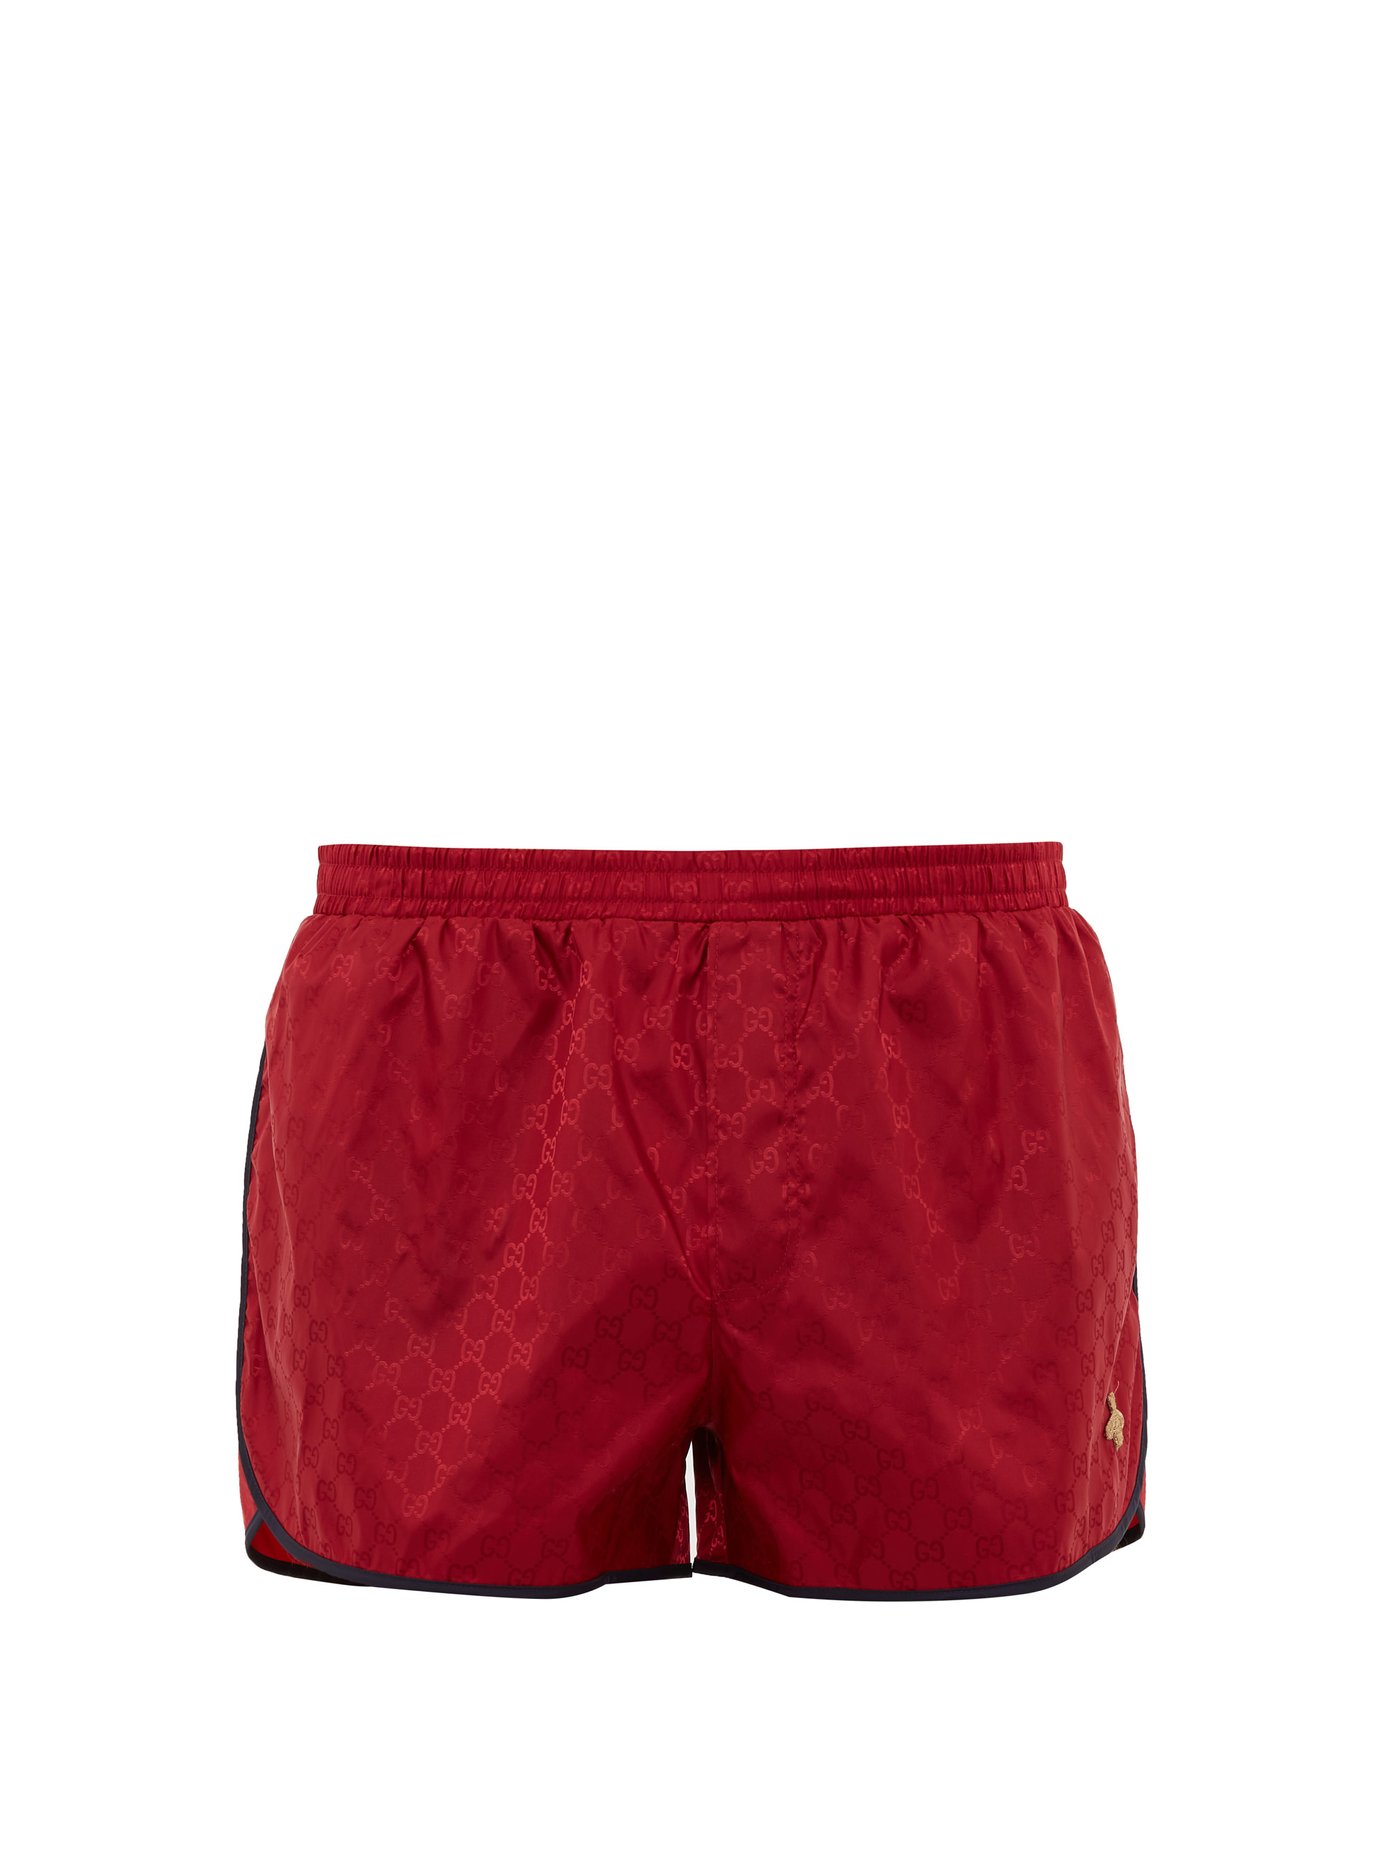 gucci red shorts